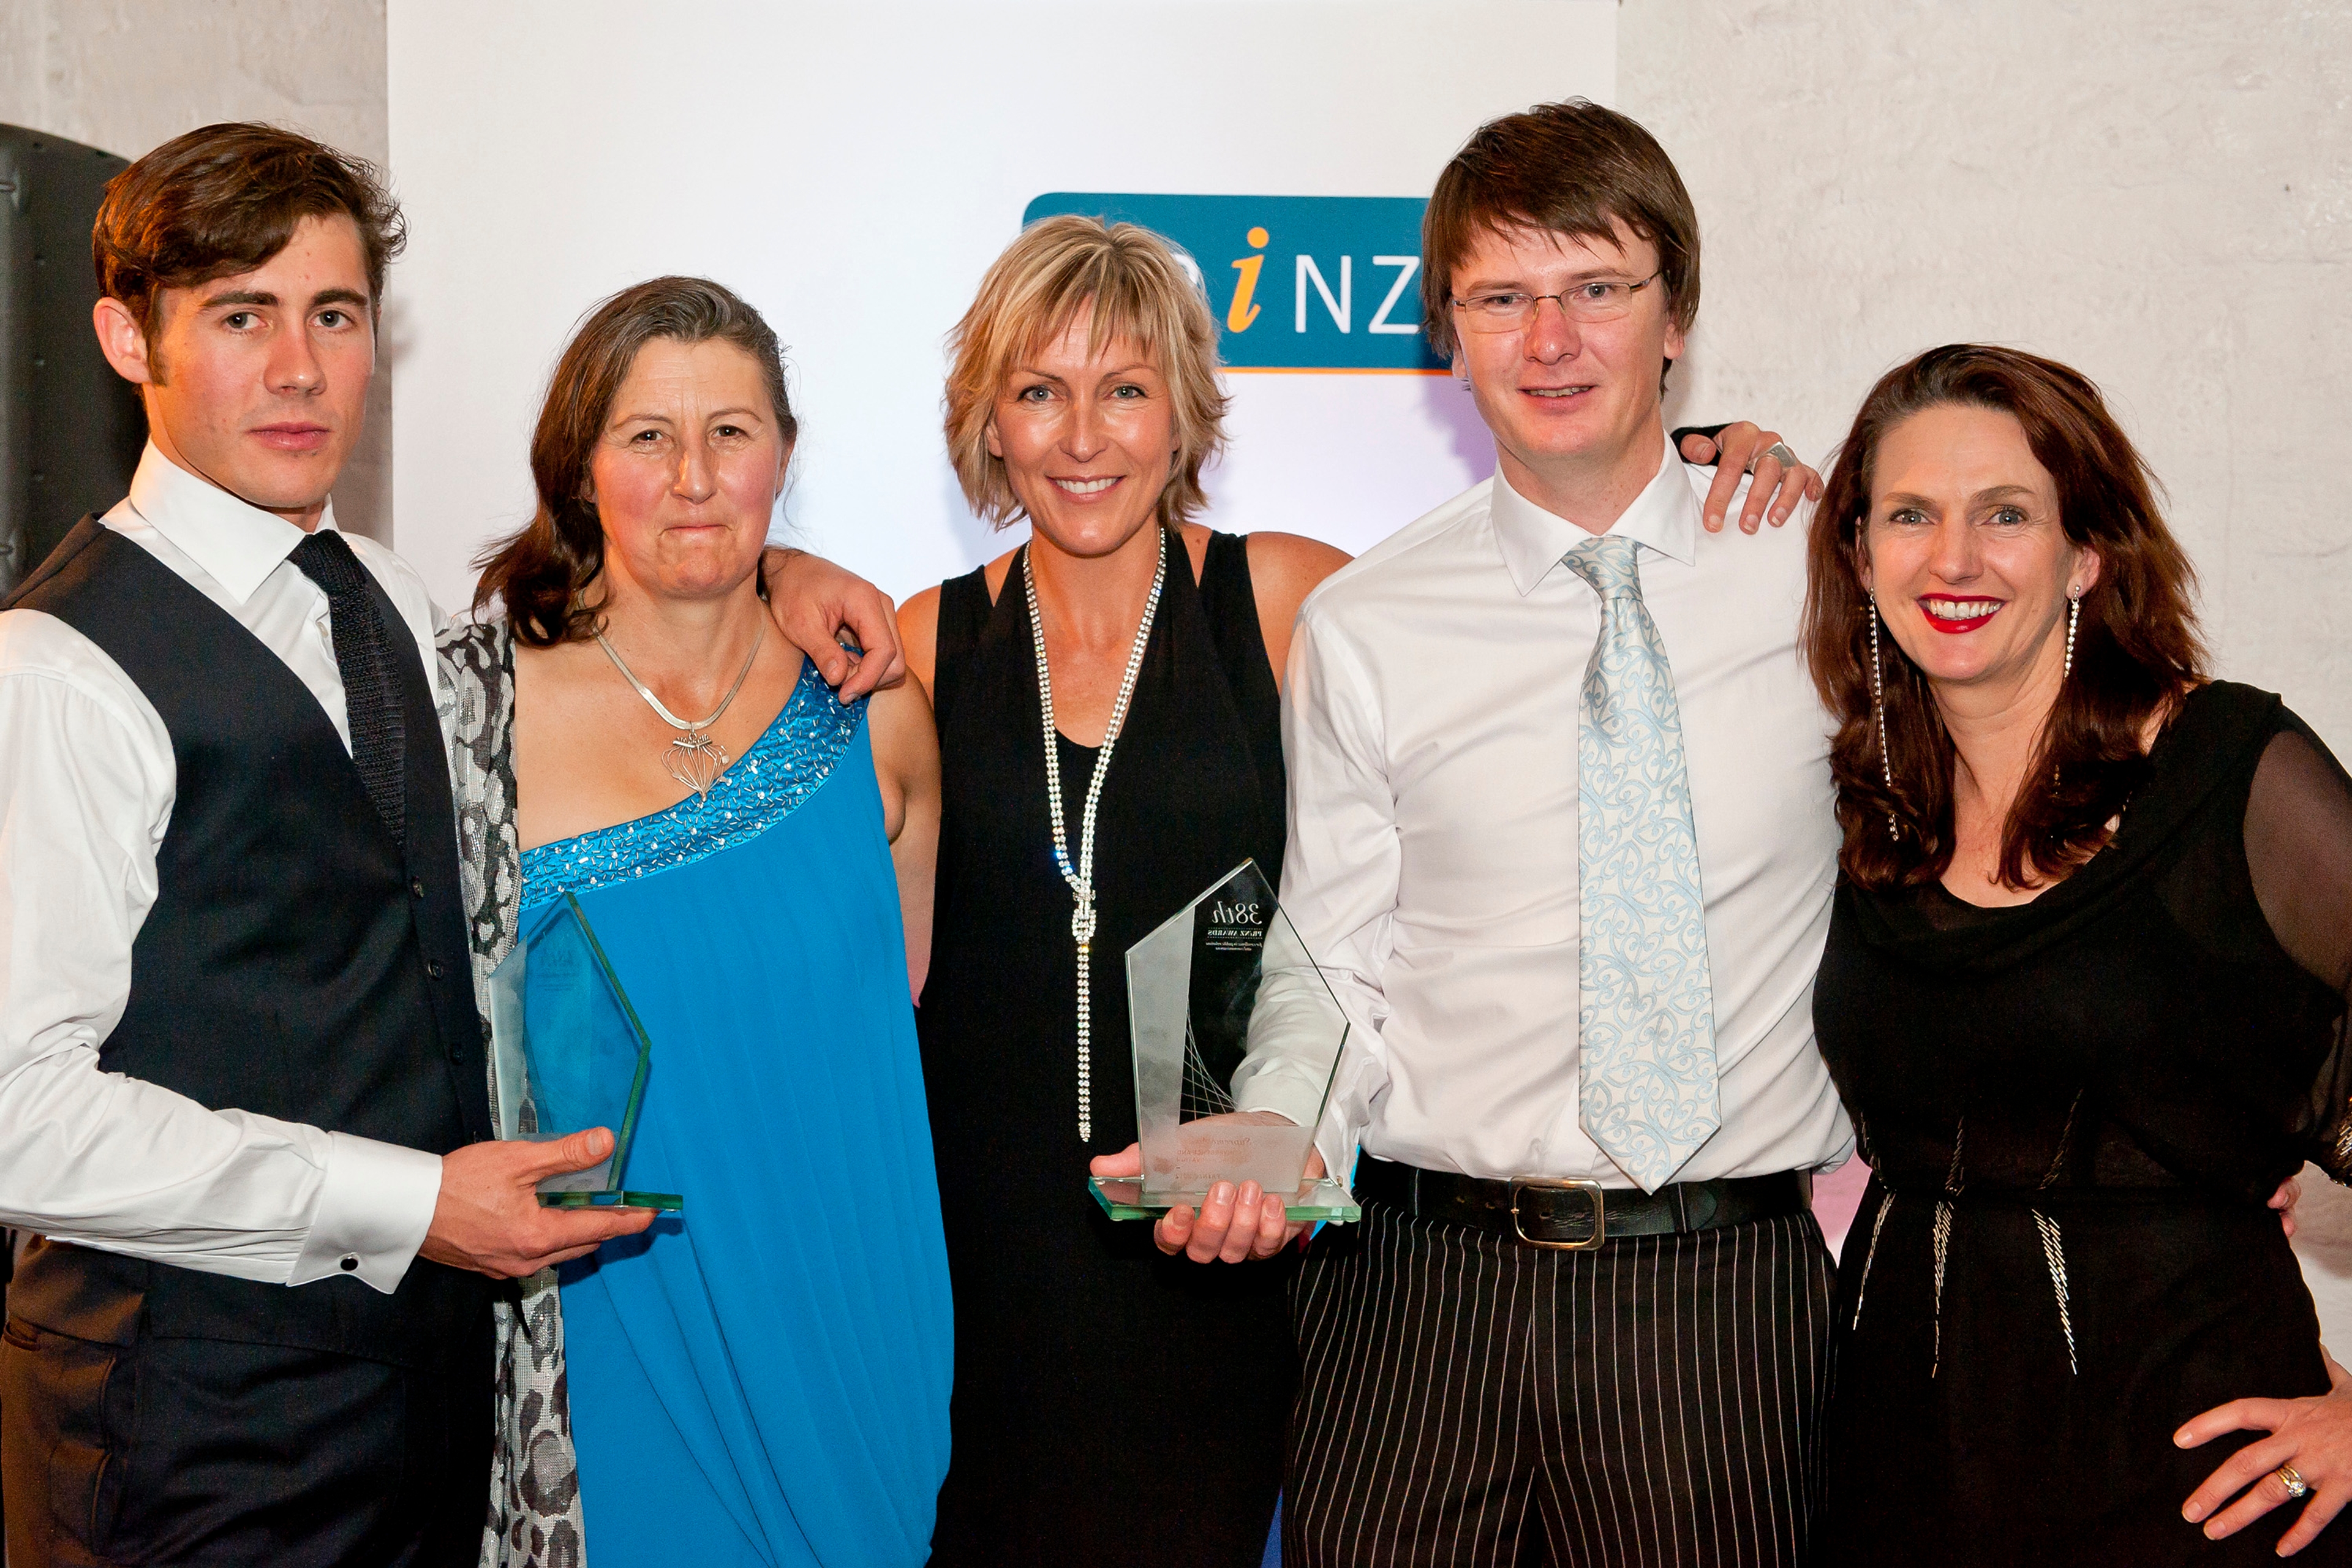 A supreme award win for Convergence and Social Innovation